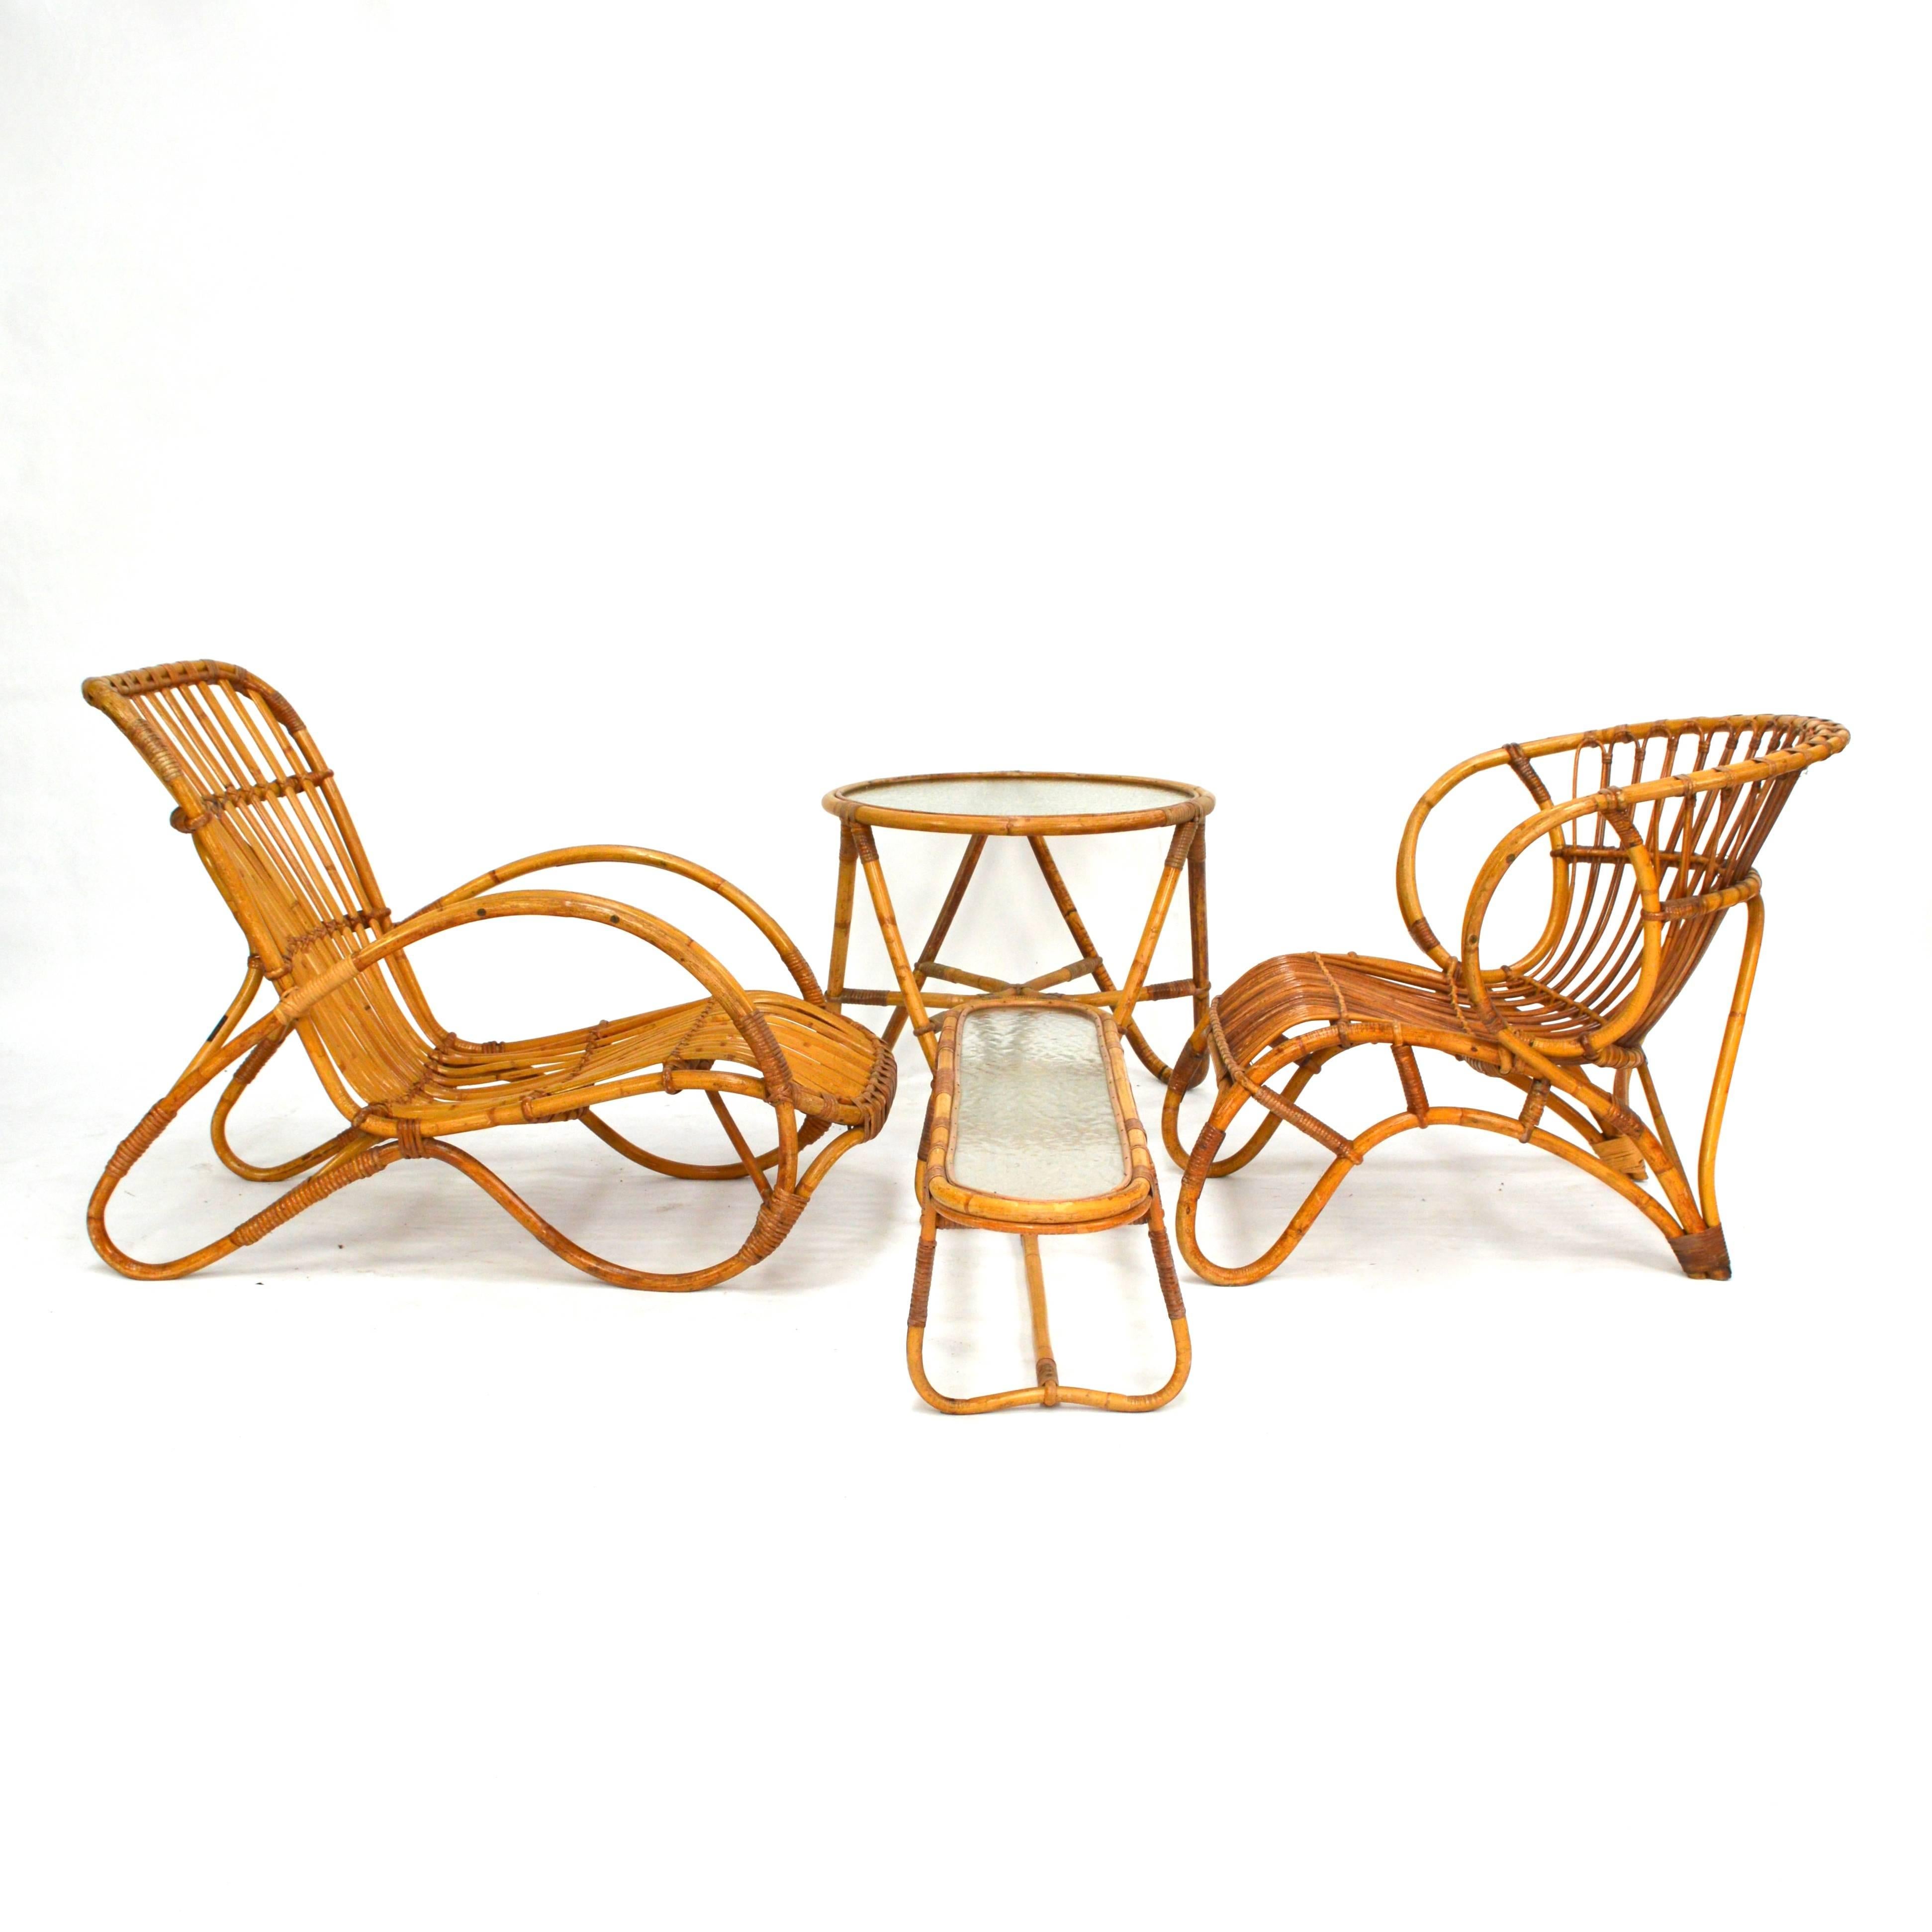 Original and rare rattan garden lounge set manufactured by the famous Dutch company Rohe in Noordwolde, The Netherlands.
Made in the manner of Viggo Boesen for E.V.A. Nissen.

It is very rare to find a complete set like this and which still